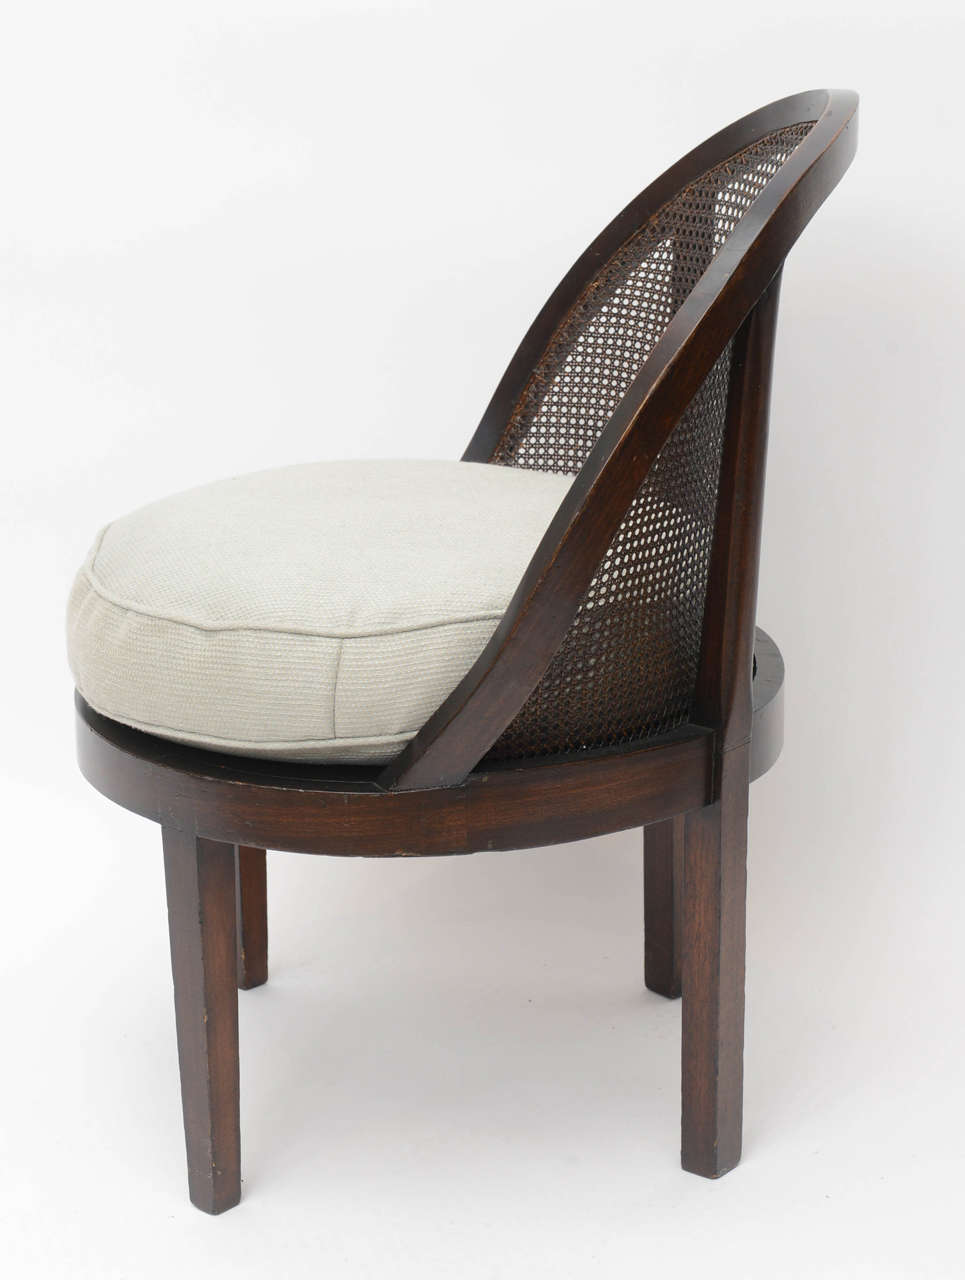 Distinctive Caribbean Style Mahogany Cane Back Chair In Good Condition For Sale In East Hampton, NY